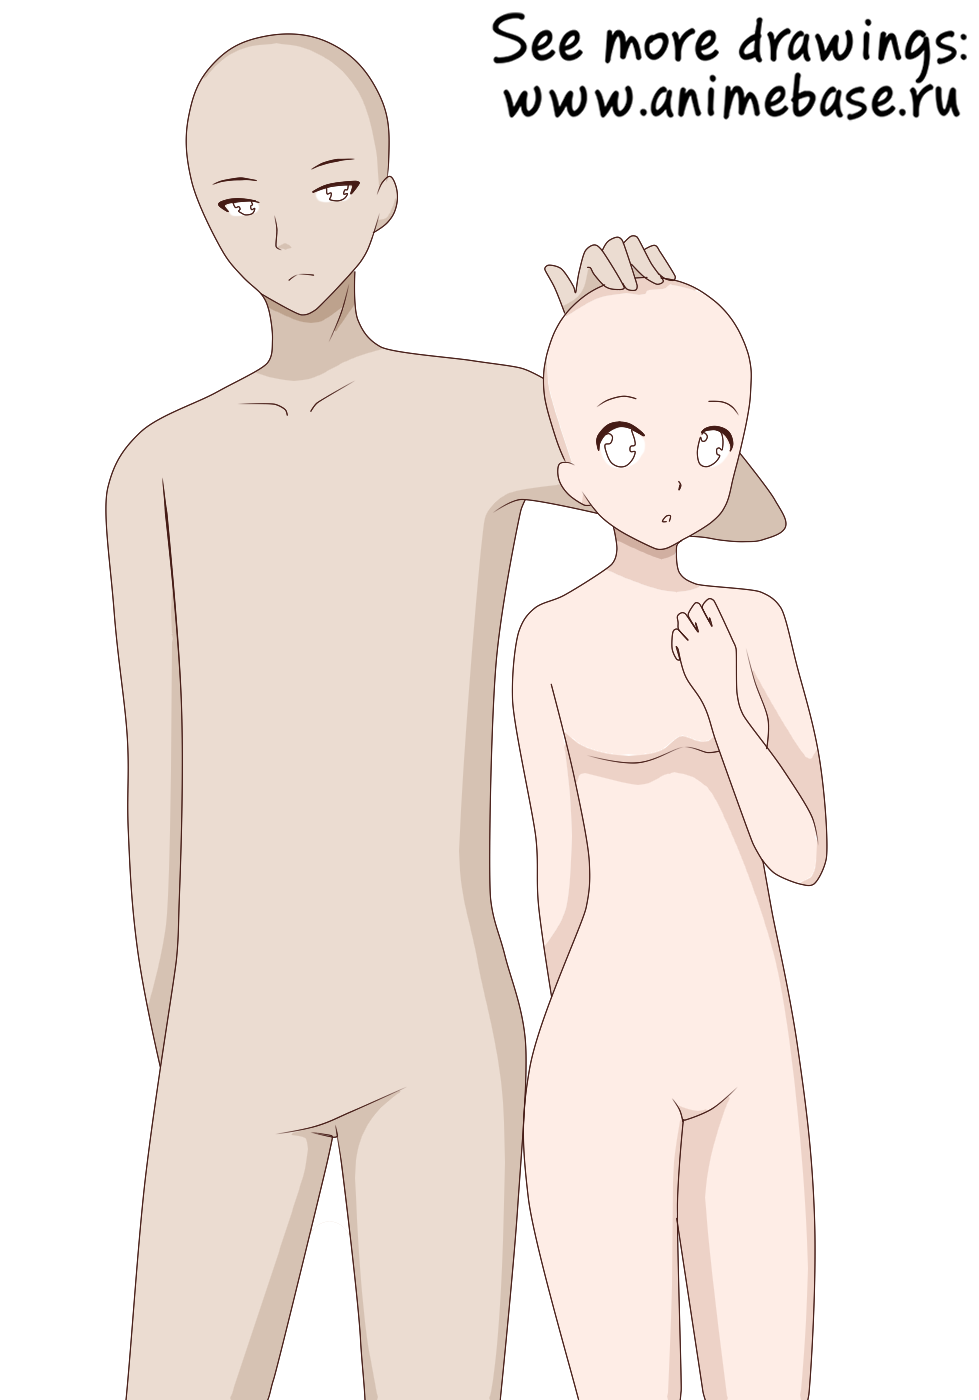 Guy And Girl Group Anime Base Download transparent anime boy png for free on pngkey.com. anime base